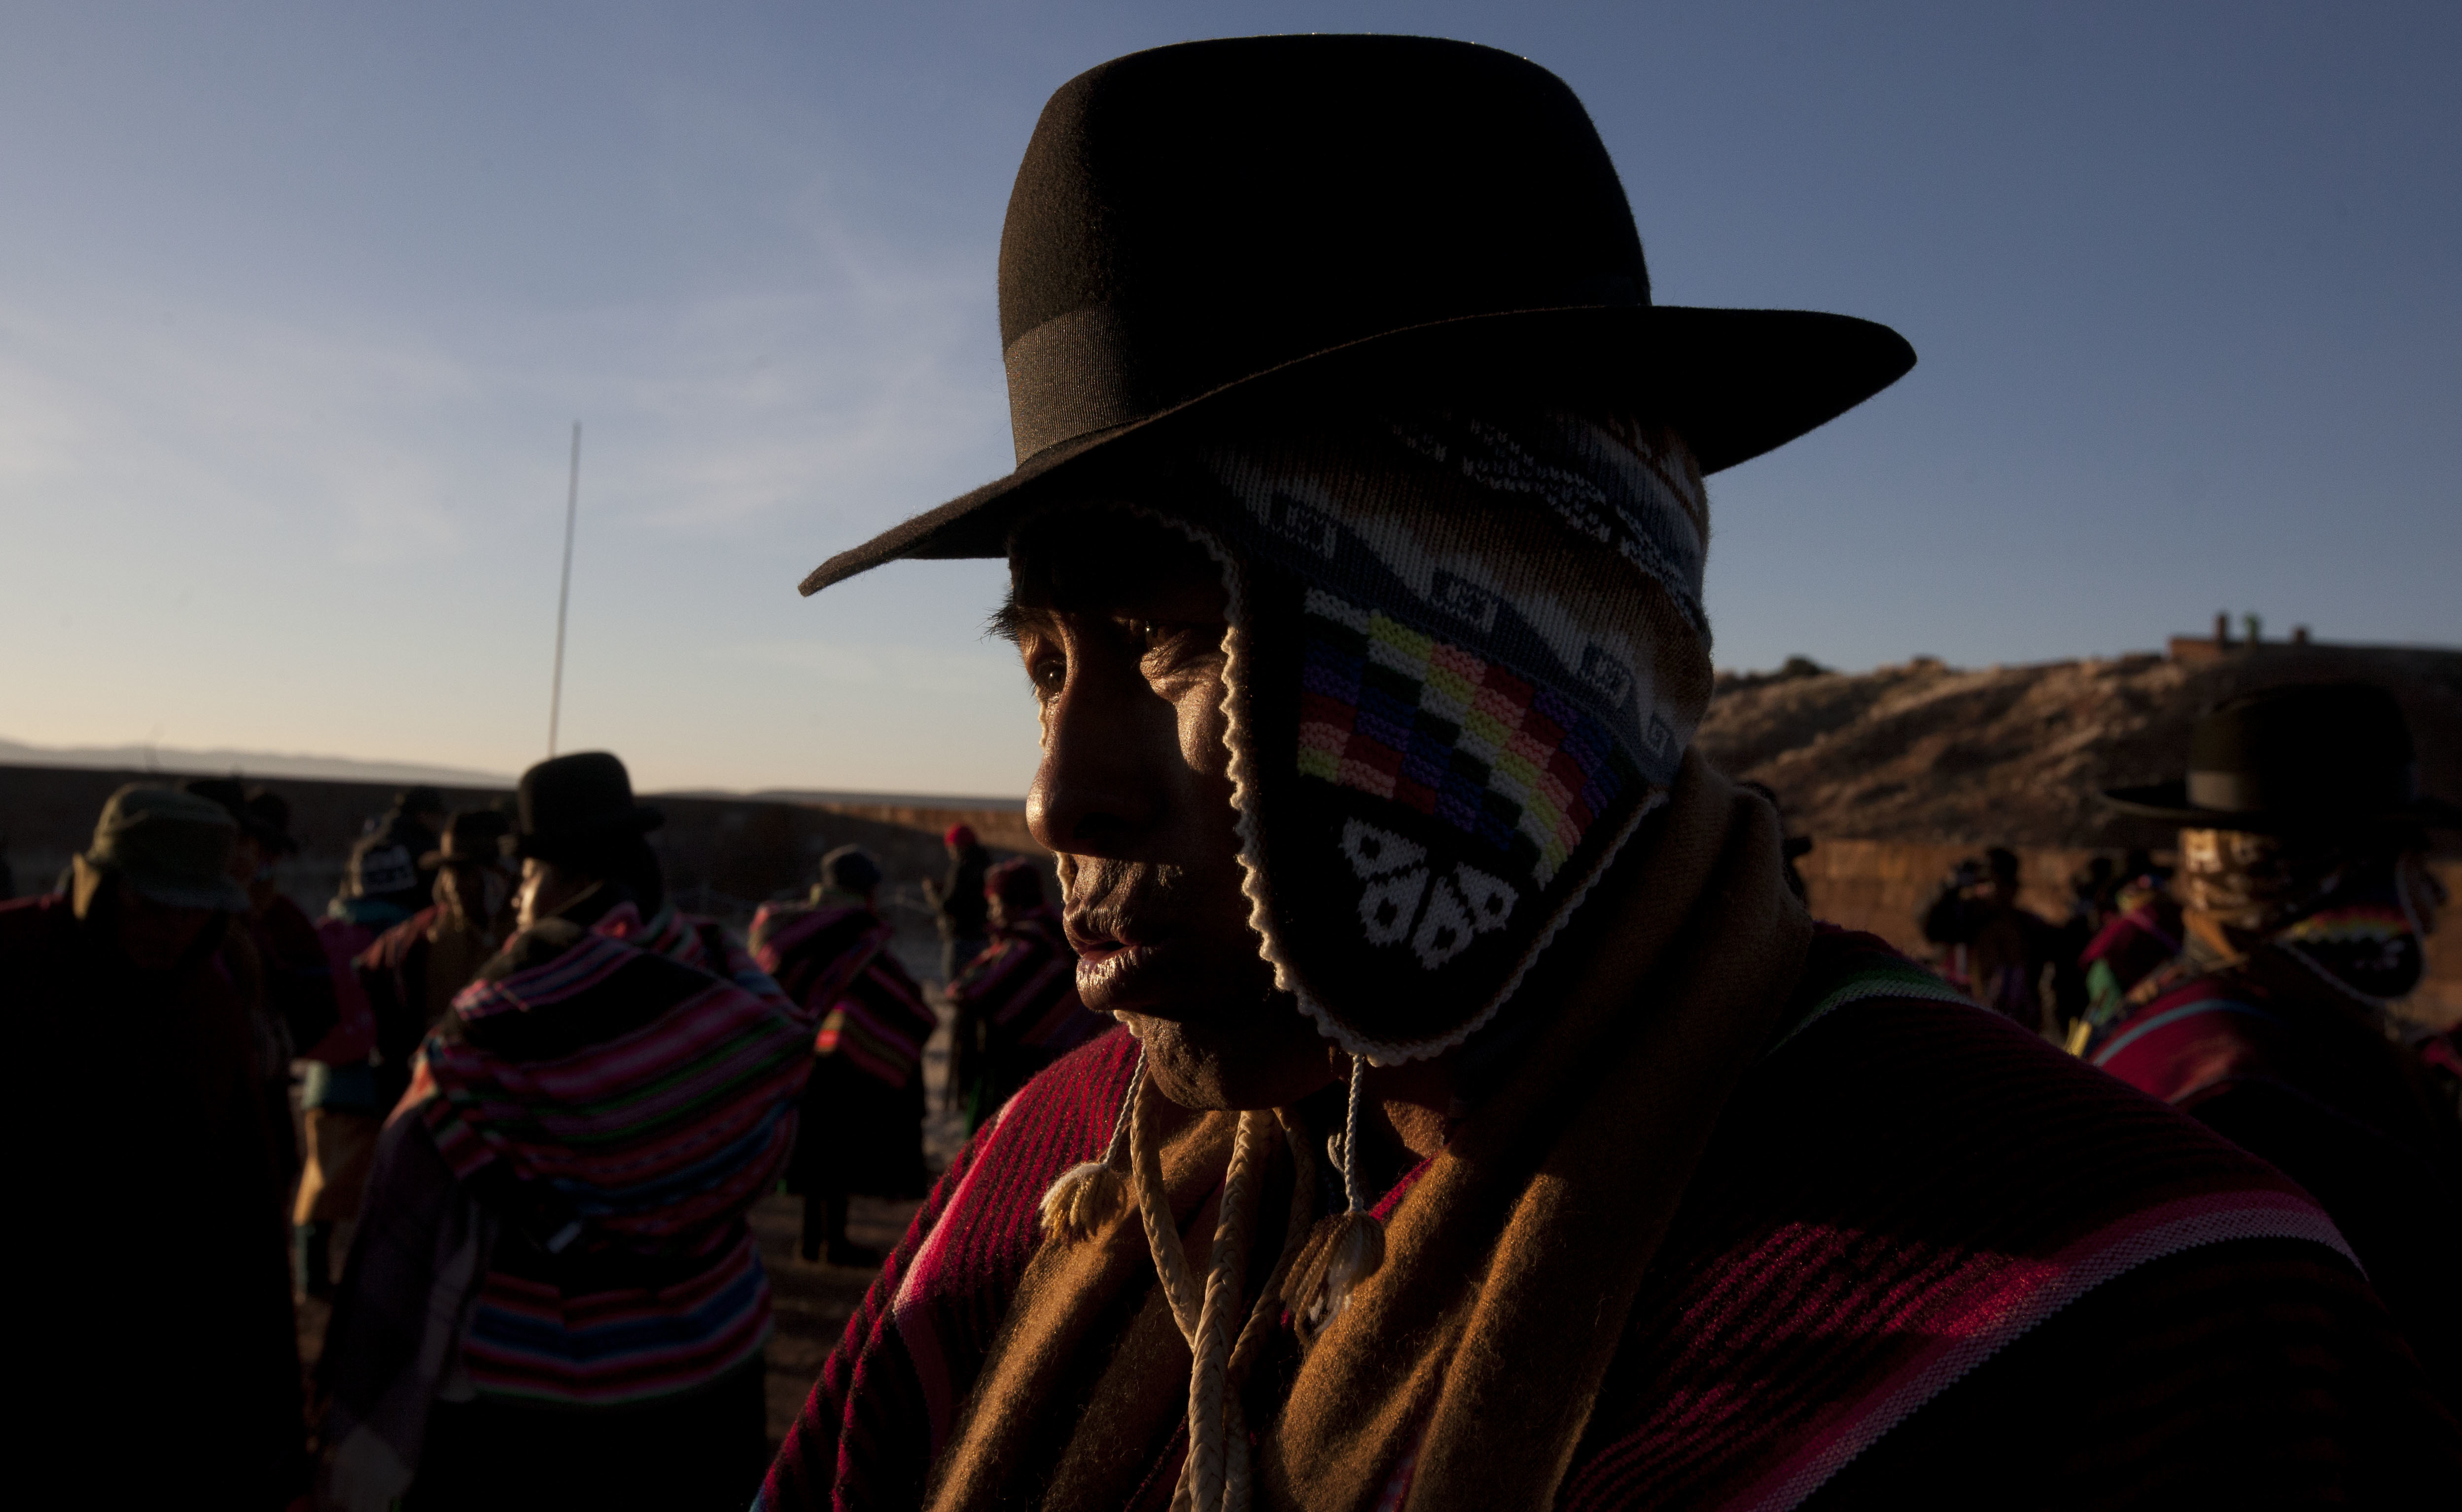 An Aymara Indian participatse at dawn, in the New Year's ritual at the ruins of the ancient city Tiwanaku, Bolivia, early Wednesday, June 21, 2017. Bolivia's Aymara Indians are celebrating the year 5,525 as well as the Southern Hemisphere's winter solstice, which marks the start of a new agricultural cycle. (AP Photo/Juan Karita)